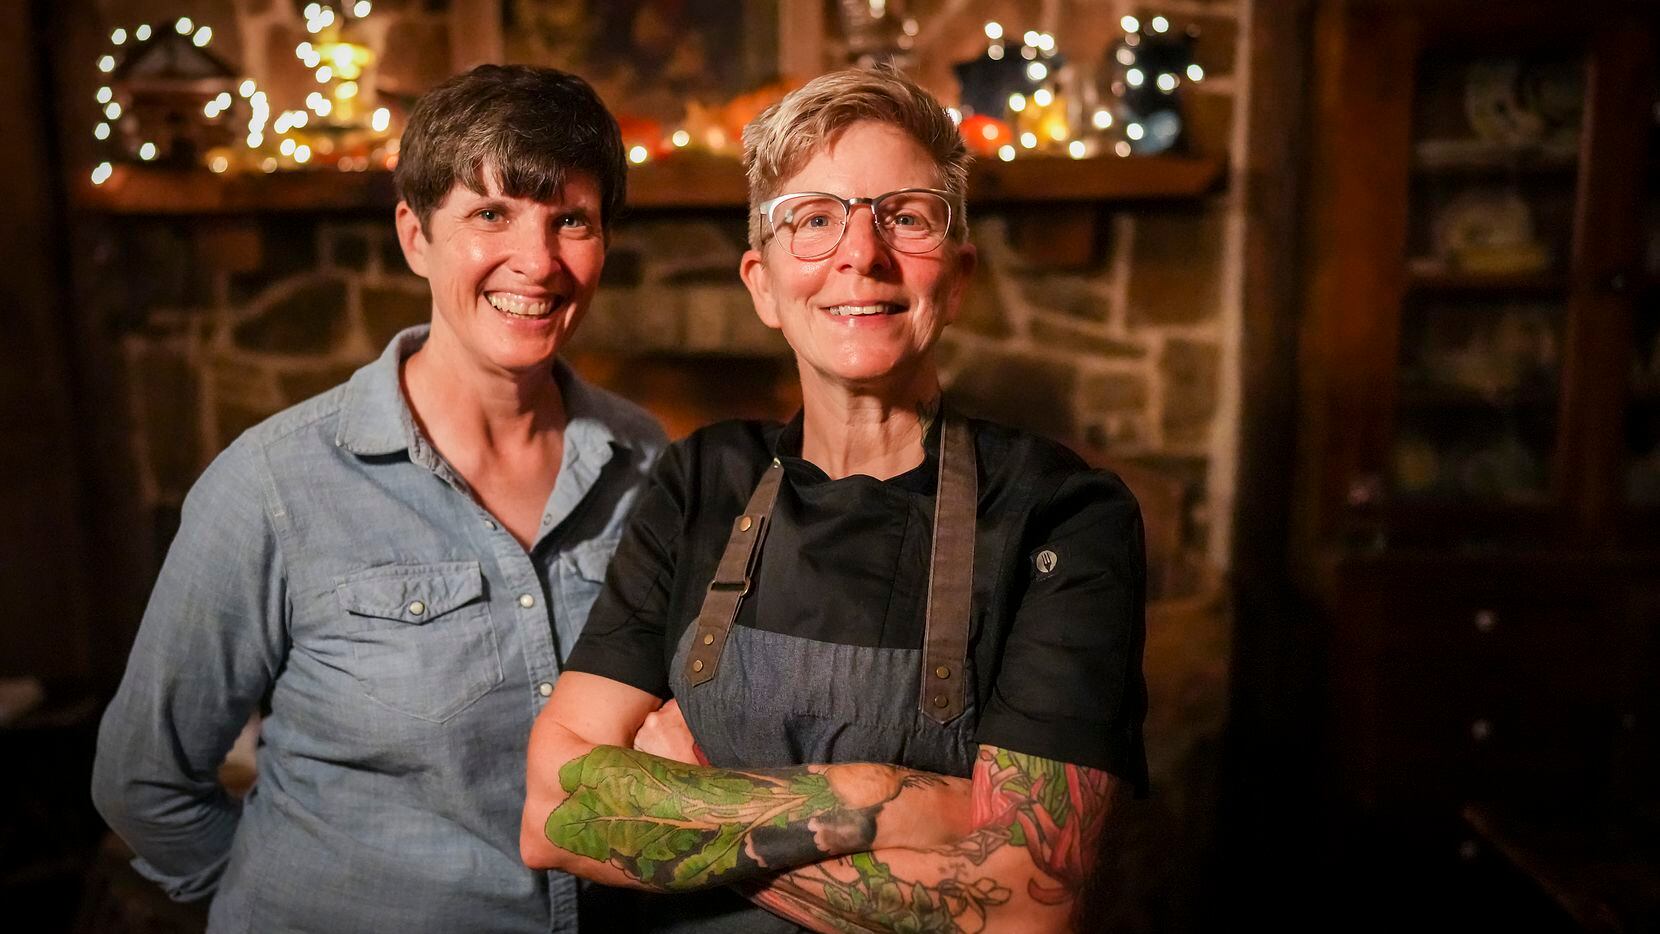 Chef Lisa Becklund (right) and Linda Ford at Living Kitchen Farm & Dairy on Friday, Oct. 22, 2021, in Depew, Okla.